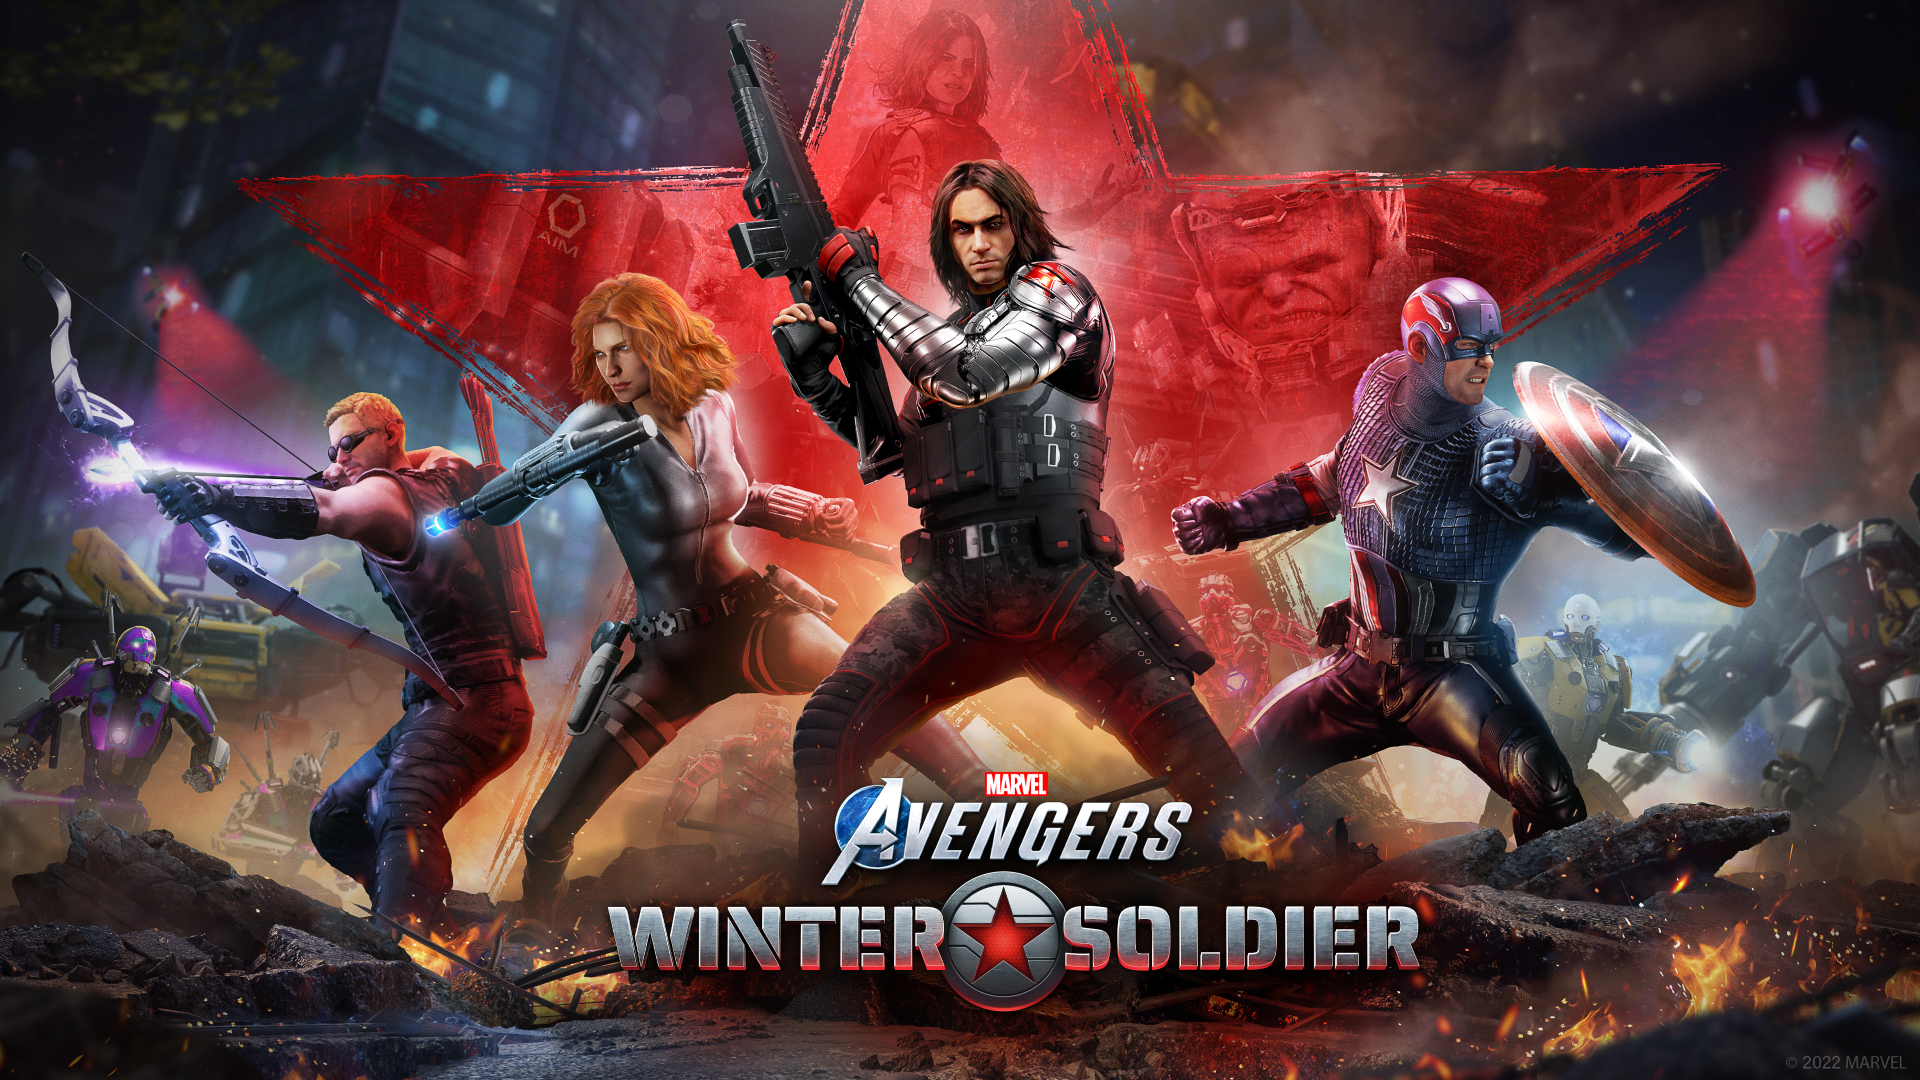 Marvels avengers on ð update which includes our new hero the winter soldier and a new omega